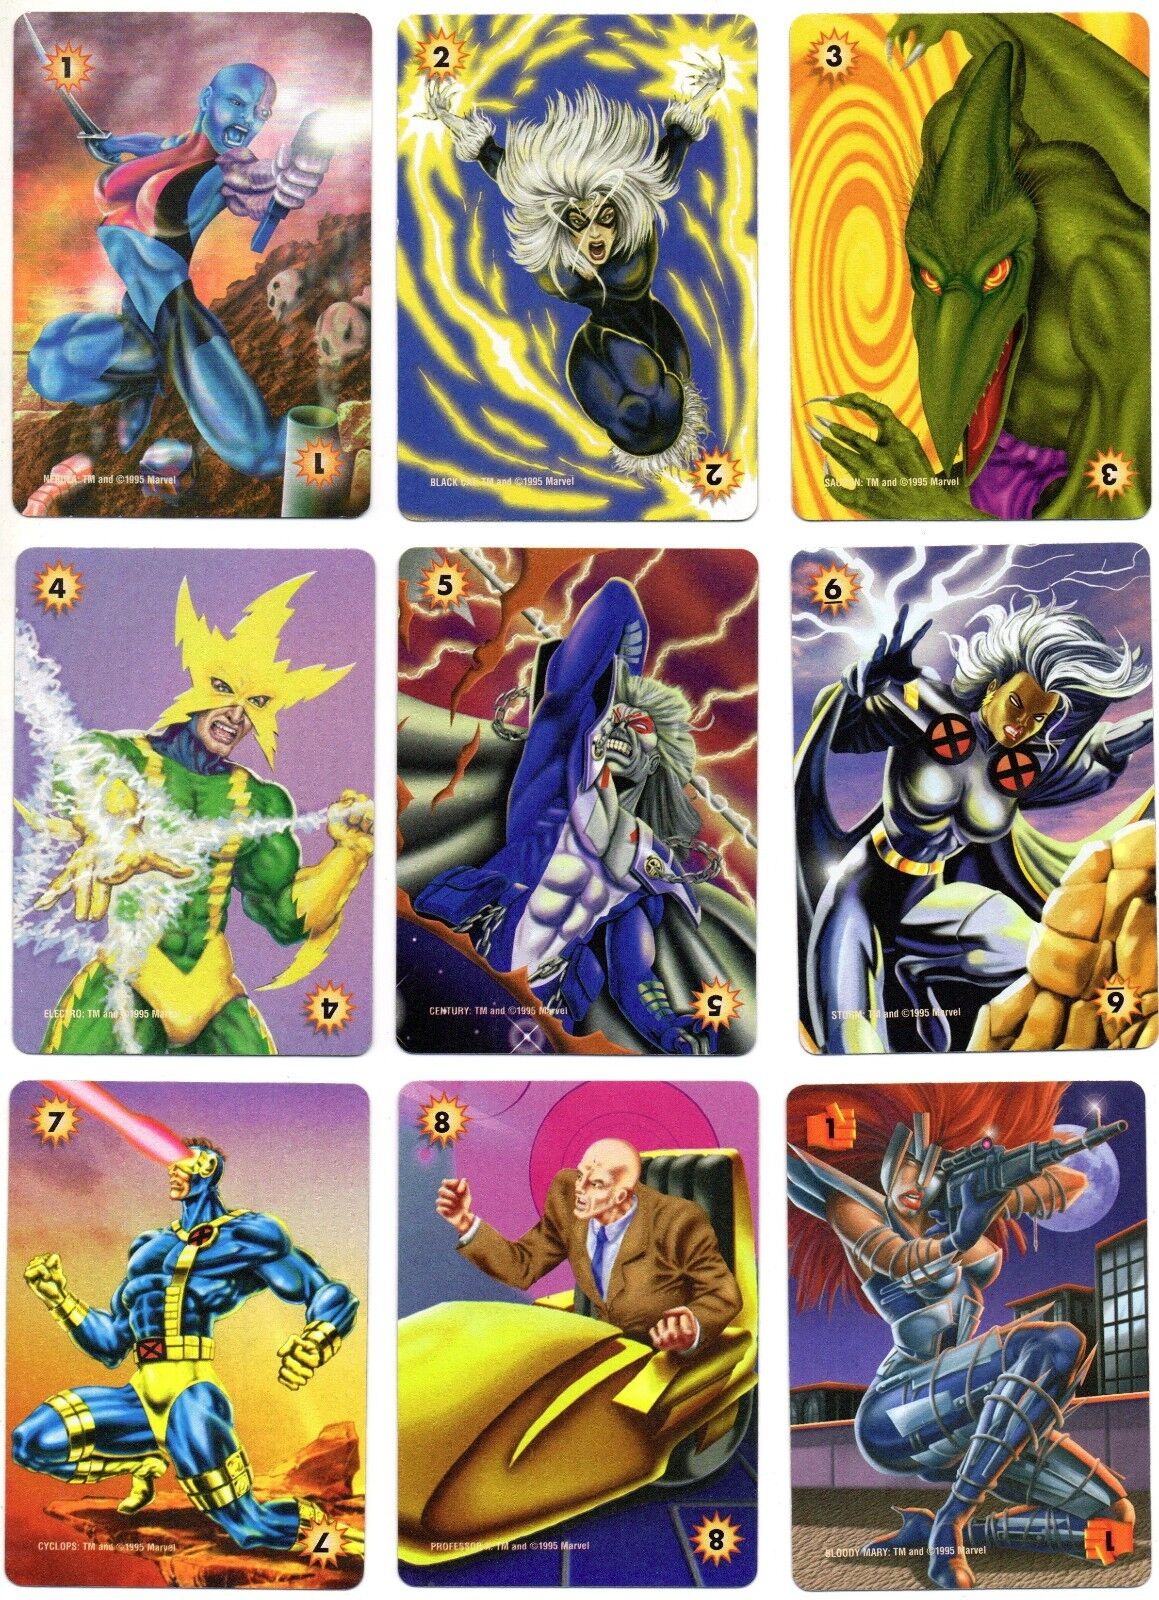 1995 Marvel OverPower Collectable Card Game You Pick the Card Finish Your Set